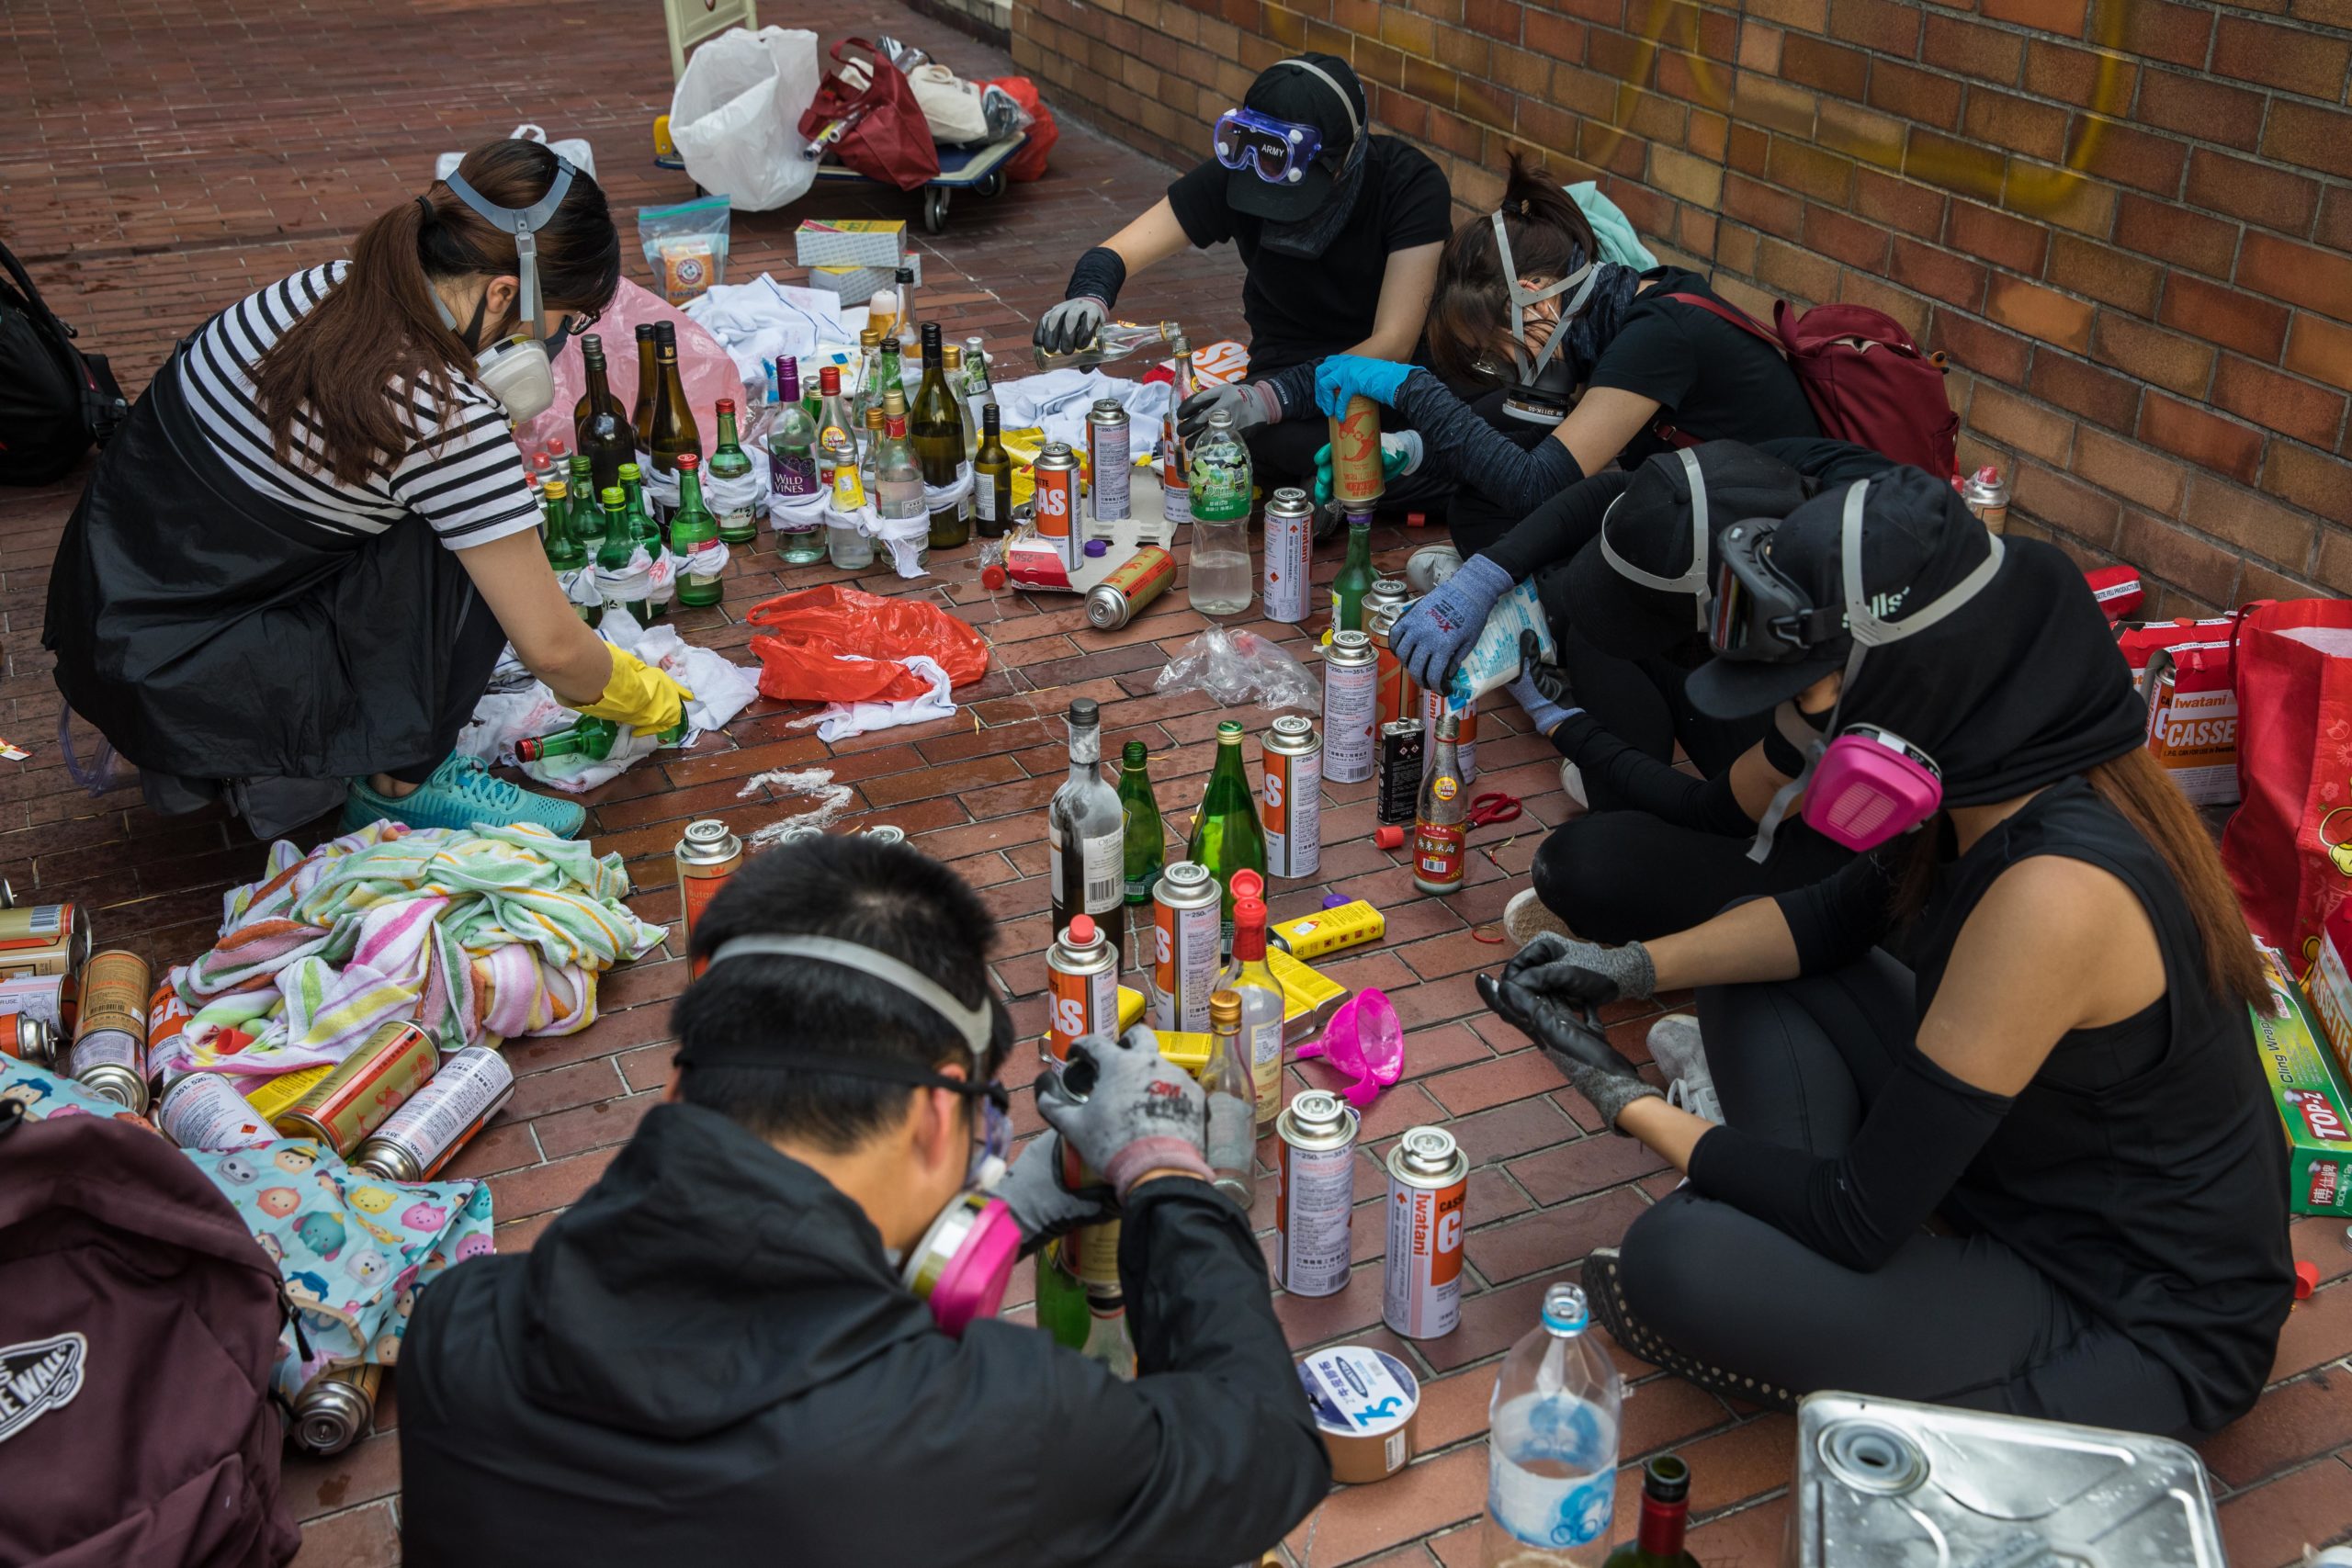 Pro-democracy protesters make molotov cocktails at the Hong Kong Polytechnic University, in Hong Kong on November 14, 2019.  (Photo: Dale De La Rey, Getty Images)